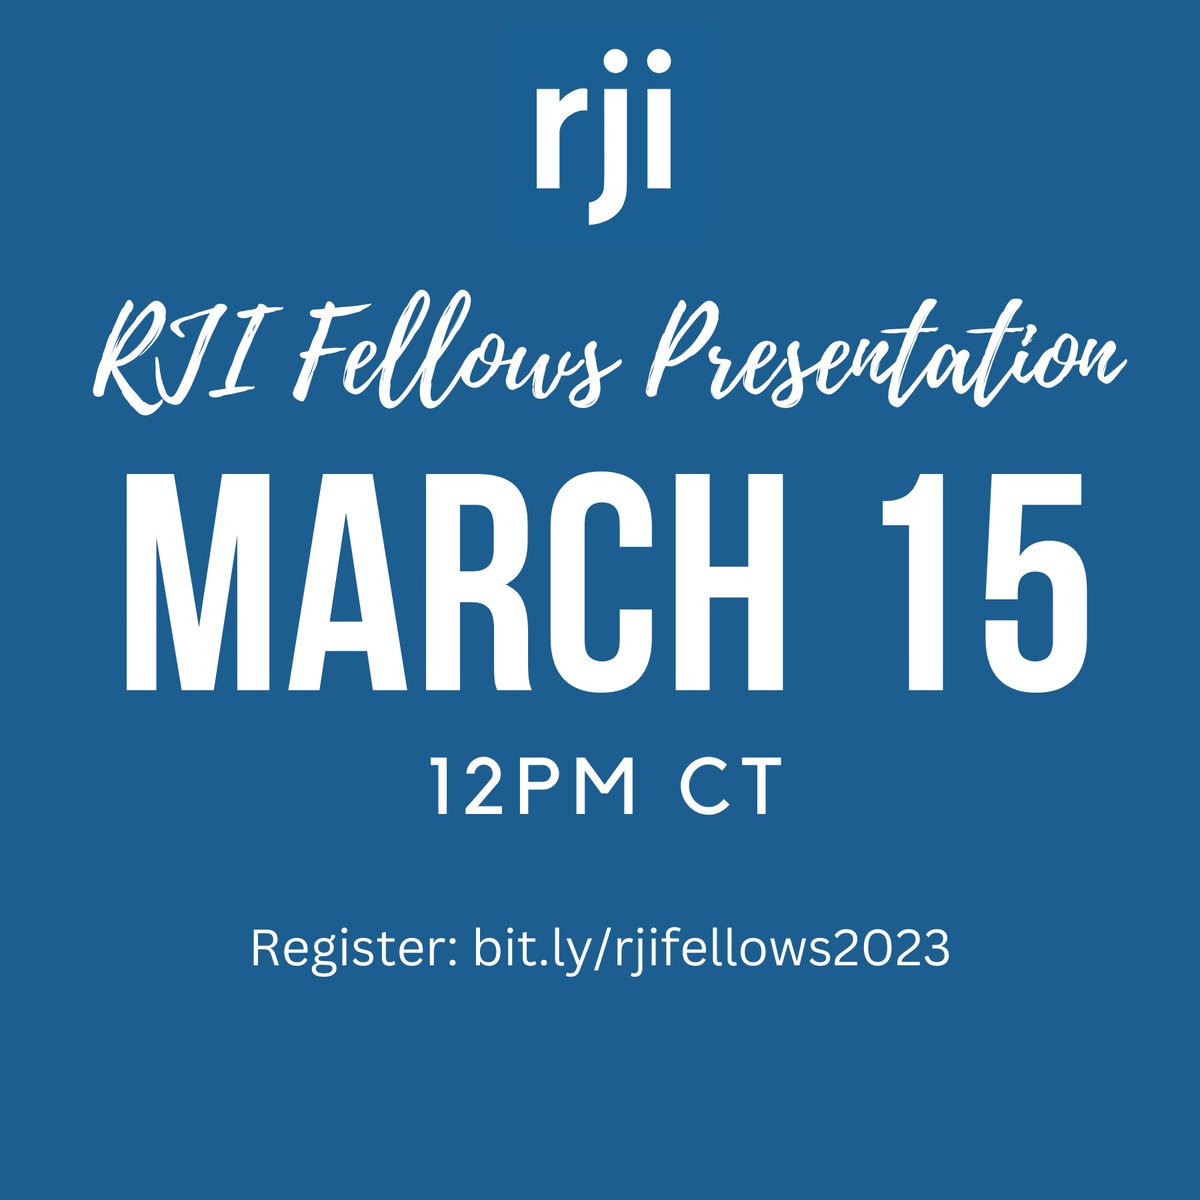 Come see demos of the RJI Fellows @TamoaC @celiawu @stacyfeldmanbrl @ArjunaSoriano @Arieloquent @Maria_Arce @katebmaxwell resources! Tools, guides and more launching in March --> bit.ly/rjifellows2023